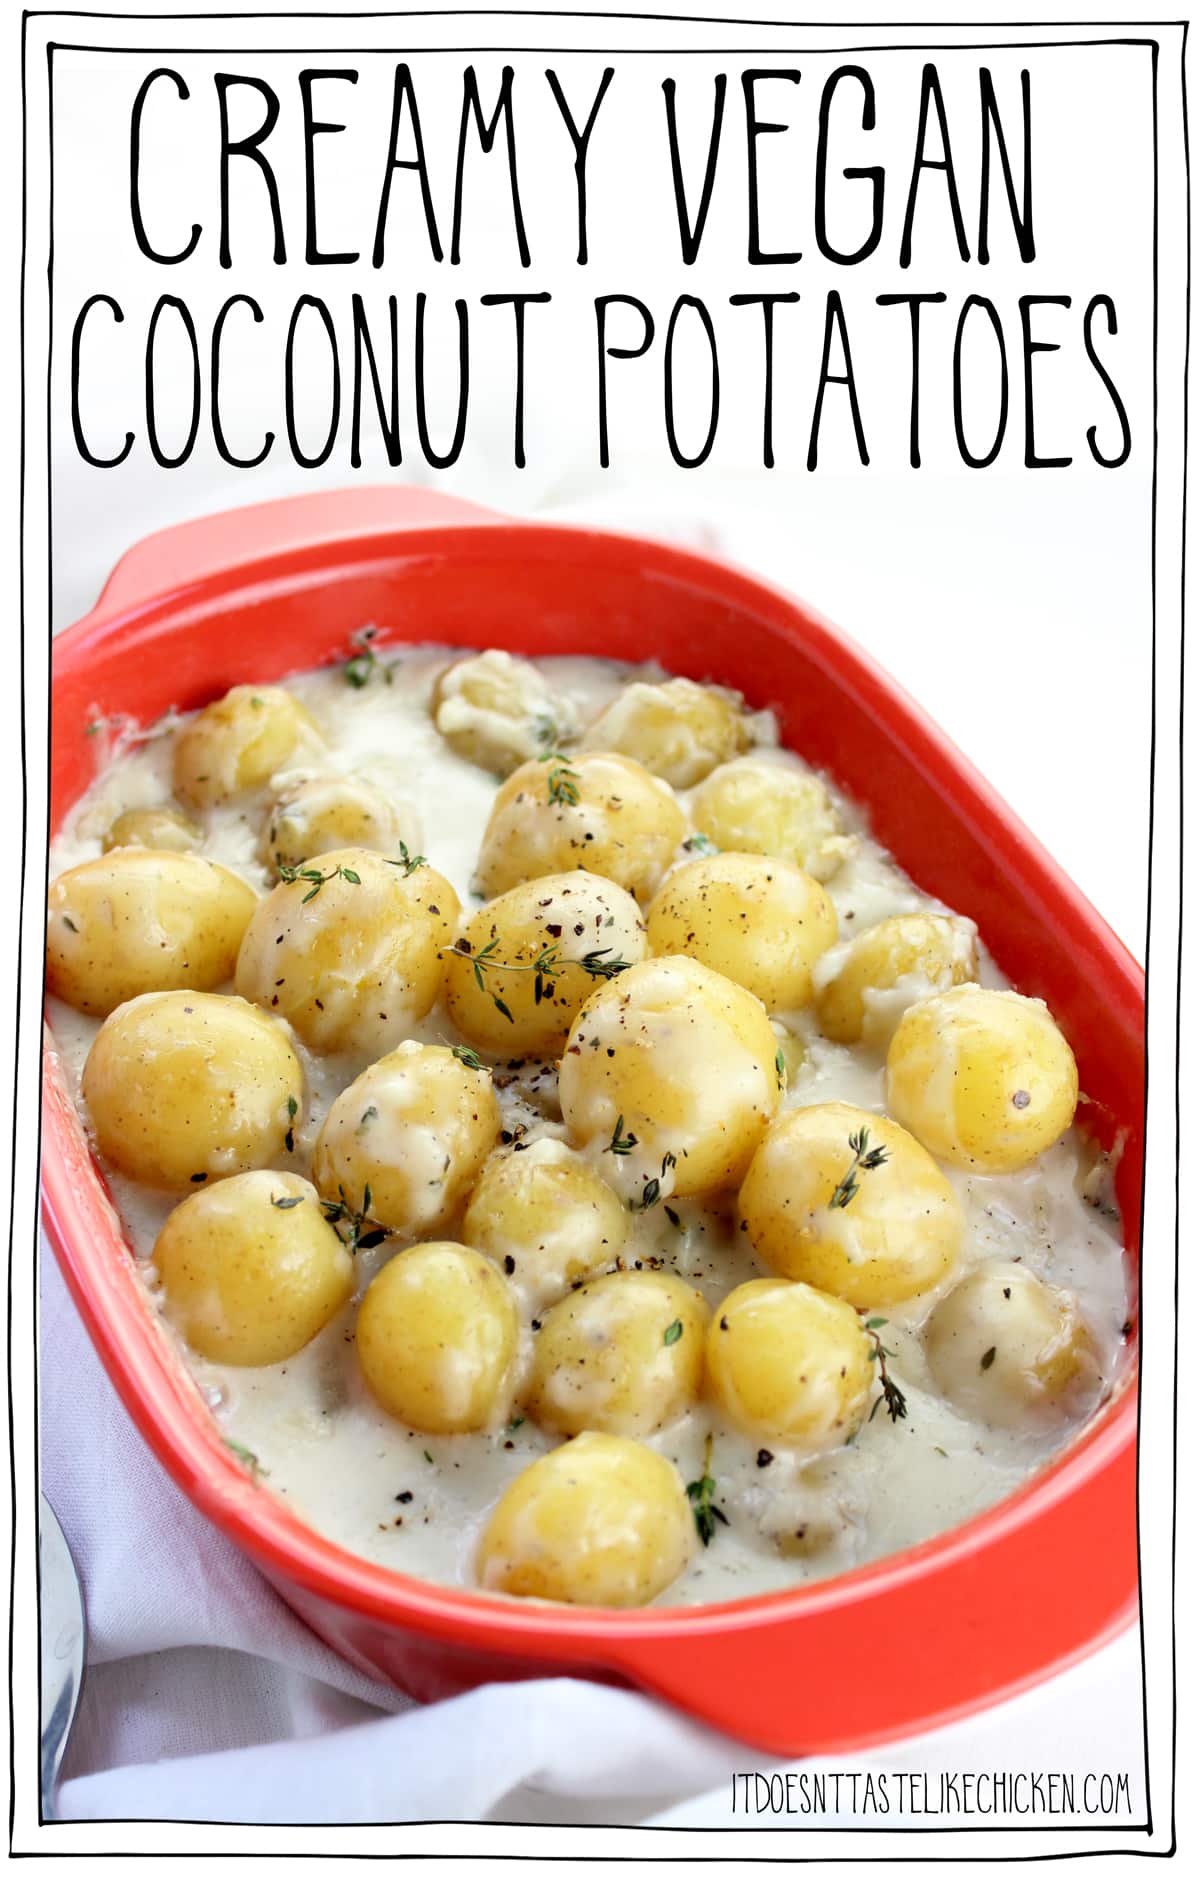 Creamy Vegan Coconut Potatoes! These are like cheater scalloped potatoes. The creamiest dreamiest baked potato dish, but unlike scalloped potatoes, they SO easy to make. No peeling, slicing, or cooking the sauce separately. Just add coconut milk, a bit of flour, and seasoning straight into your casserole dish, mix it up, then add in baby potatoes, cover with foil and bake. THAT'S IT! I swear it really is that easy. #itdoesnttastelikechicken #veganrecipes #potatoes